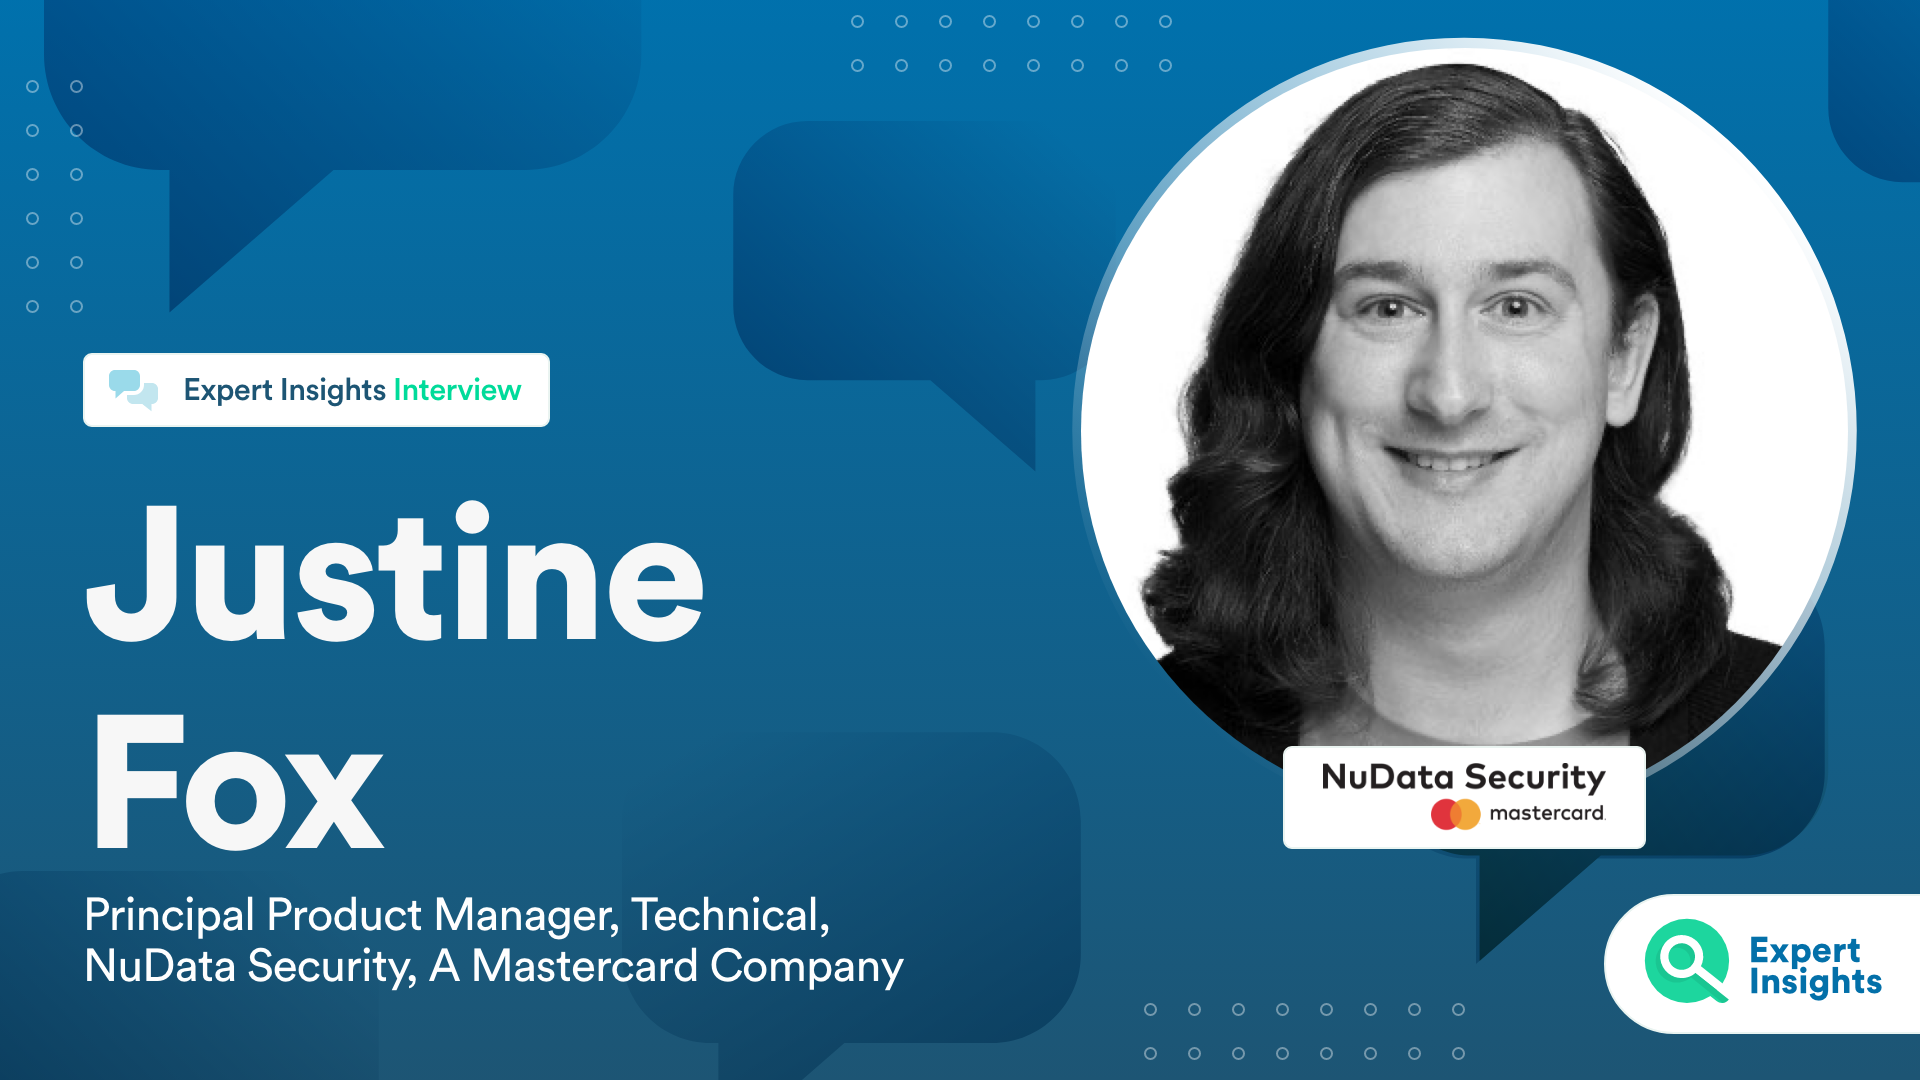 Justine Fox, Principal Product Manager, Technical at NuData Security, A Mastercard Company